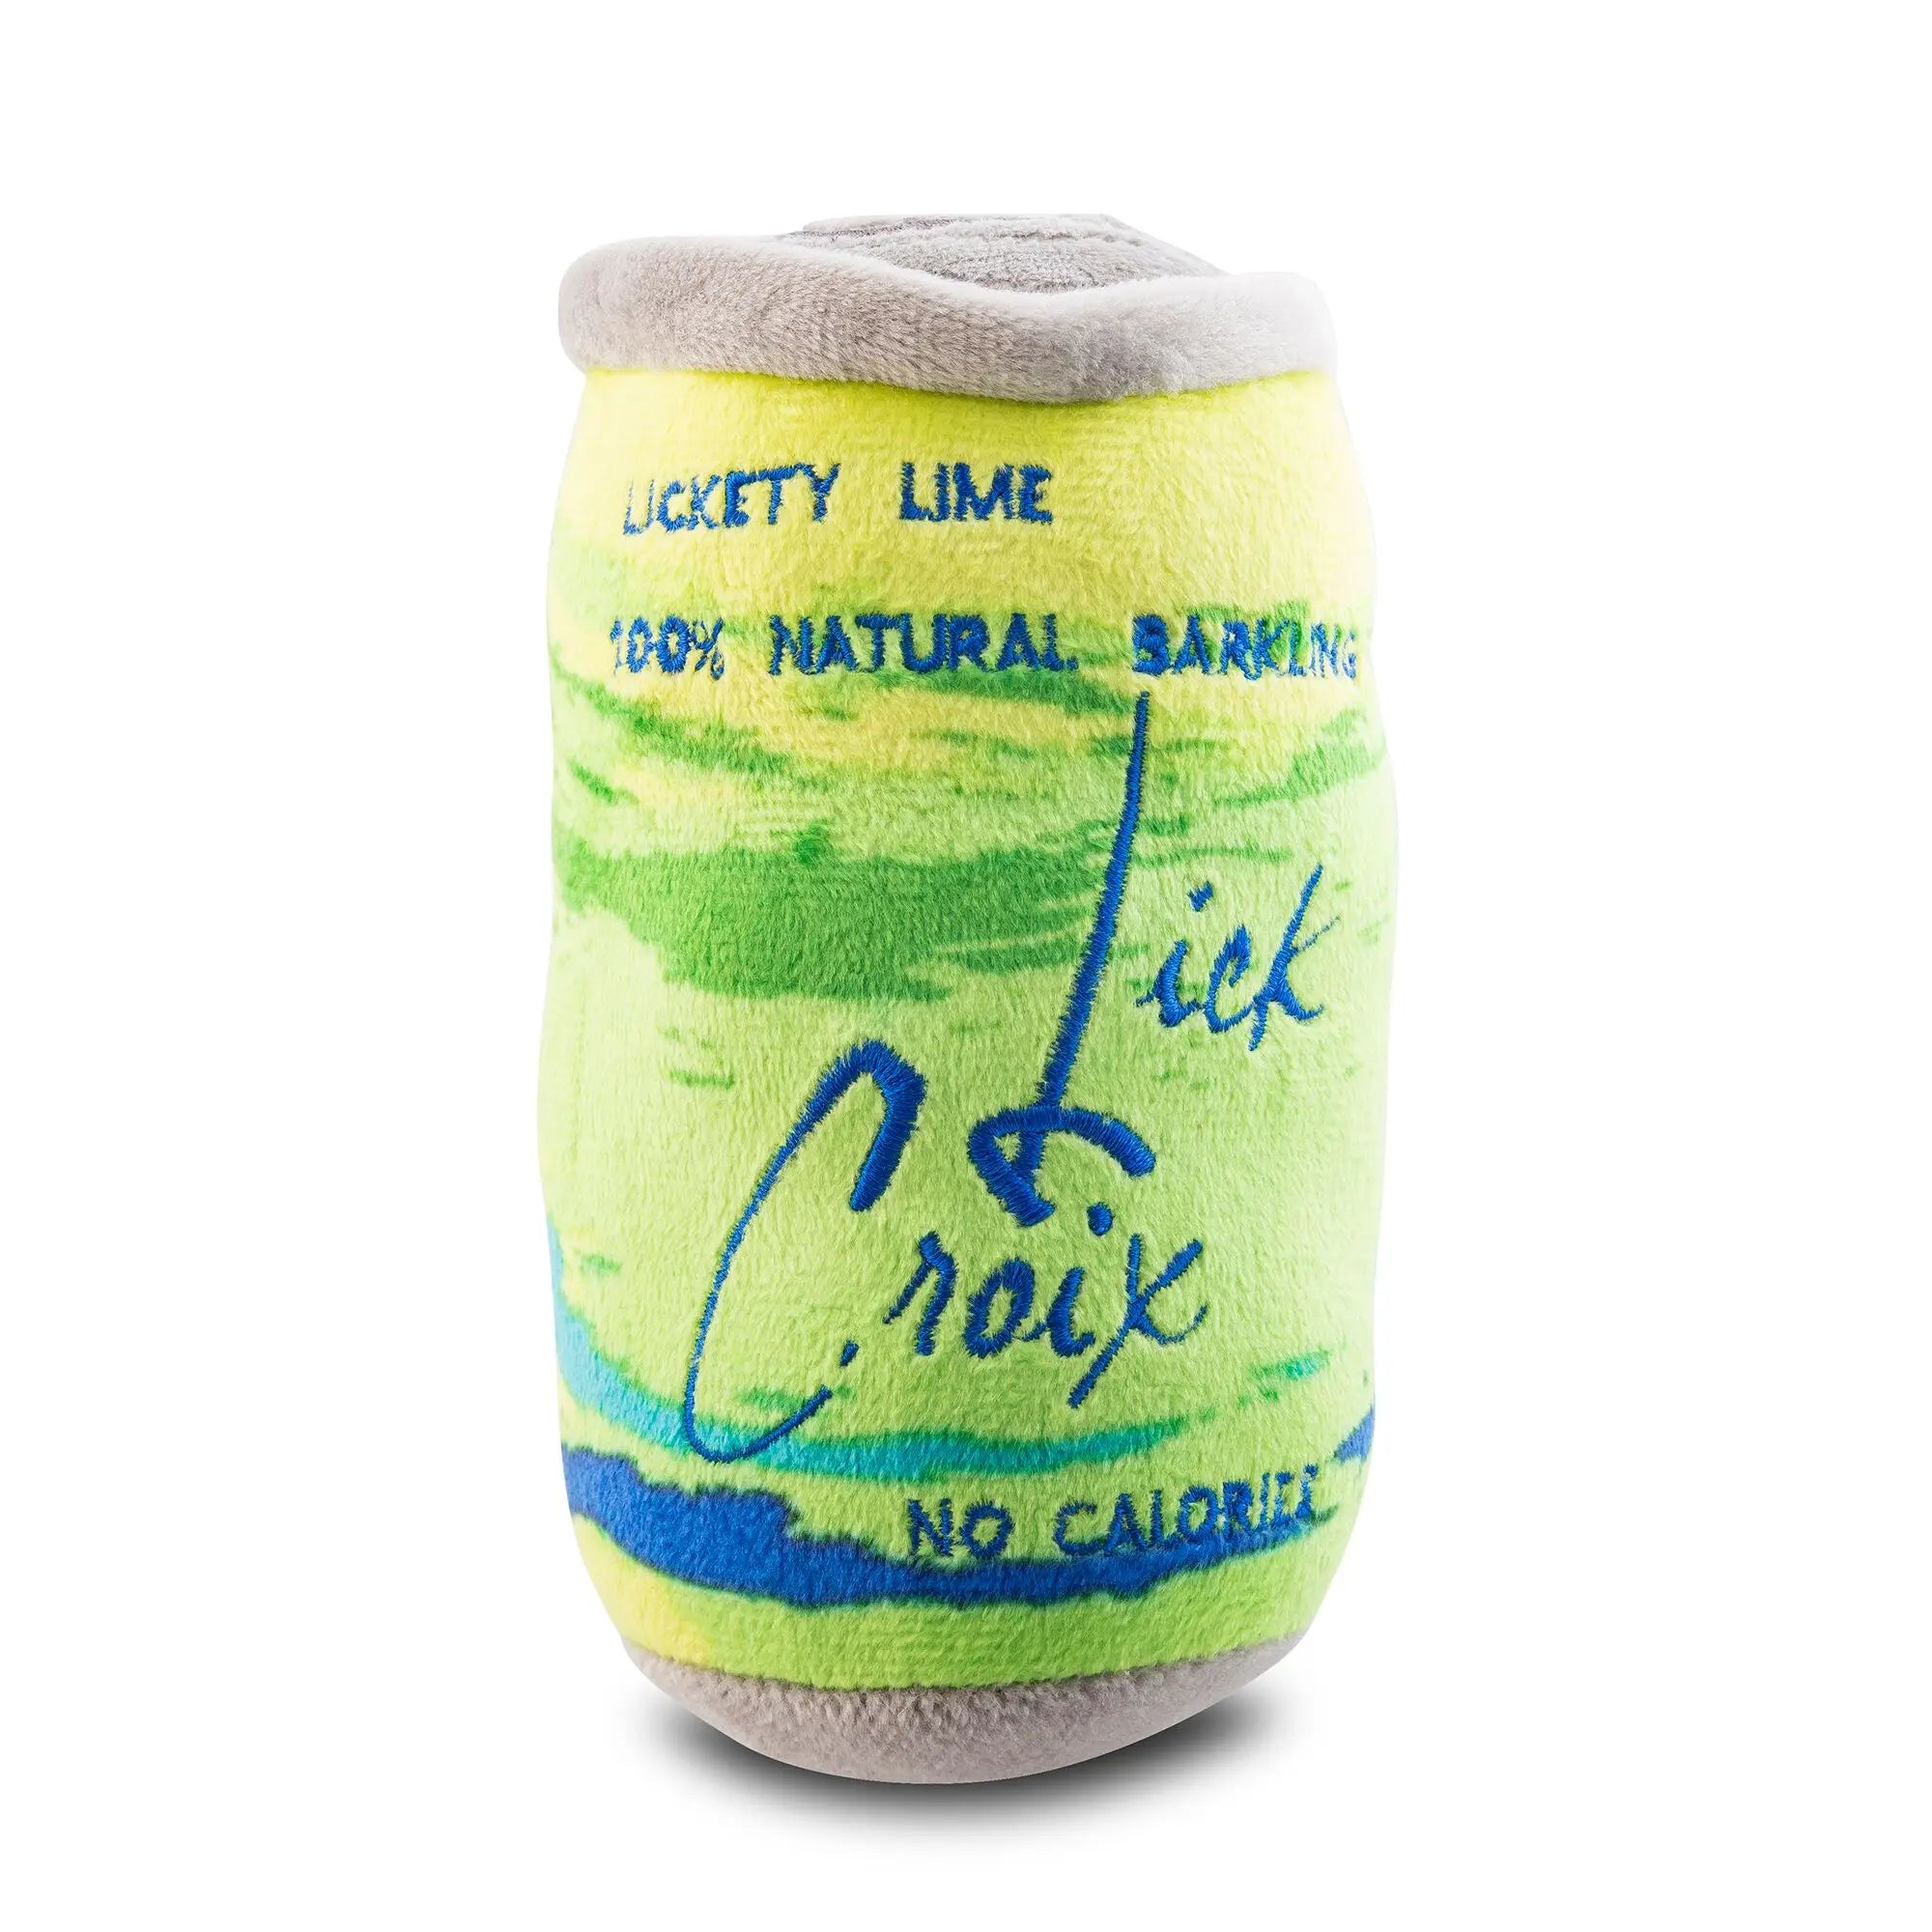 lick croix lickety lime barking water